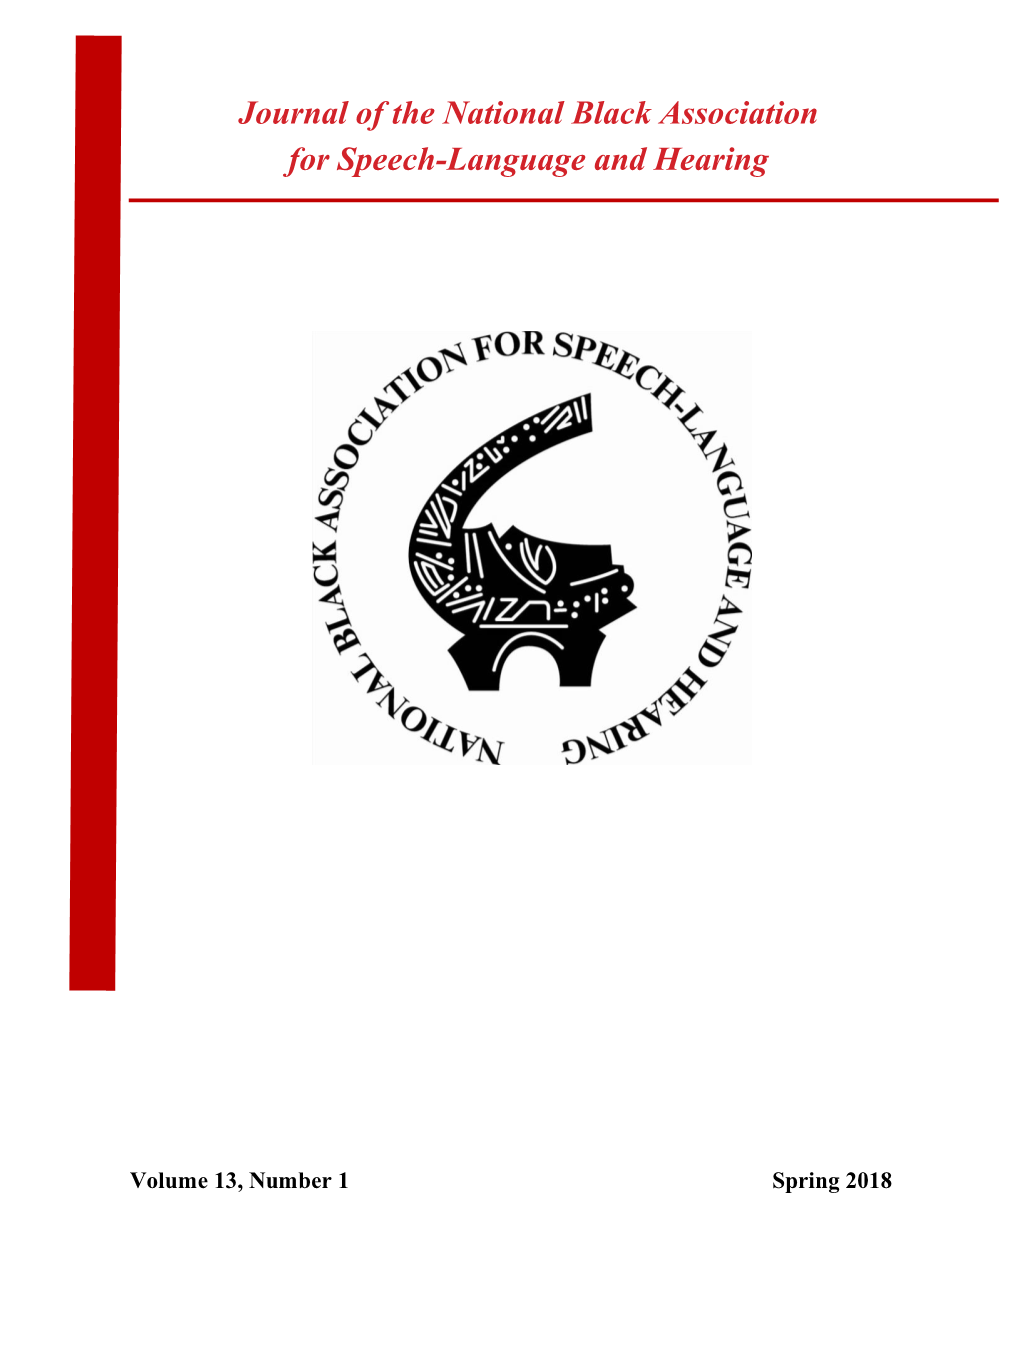 Journal of the National Black Association for Speech-Language and Hearing